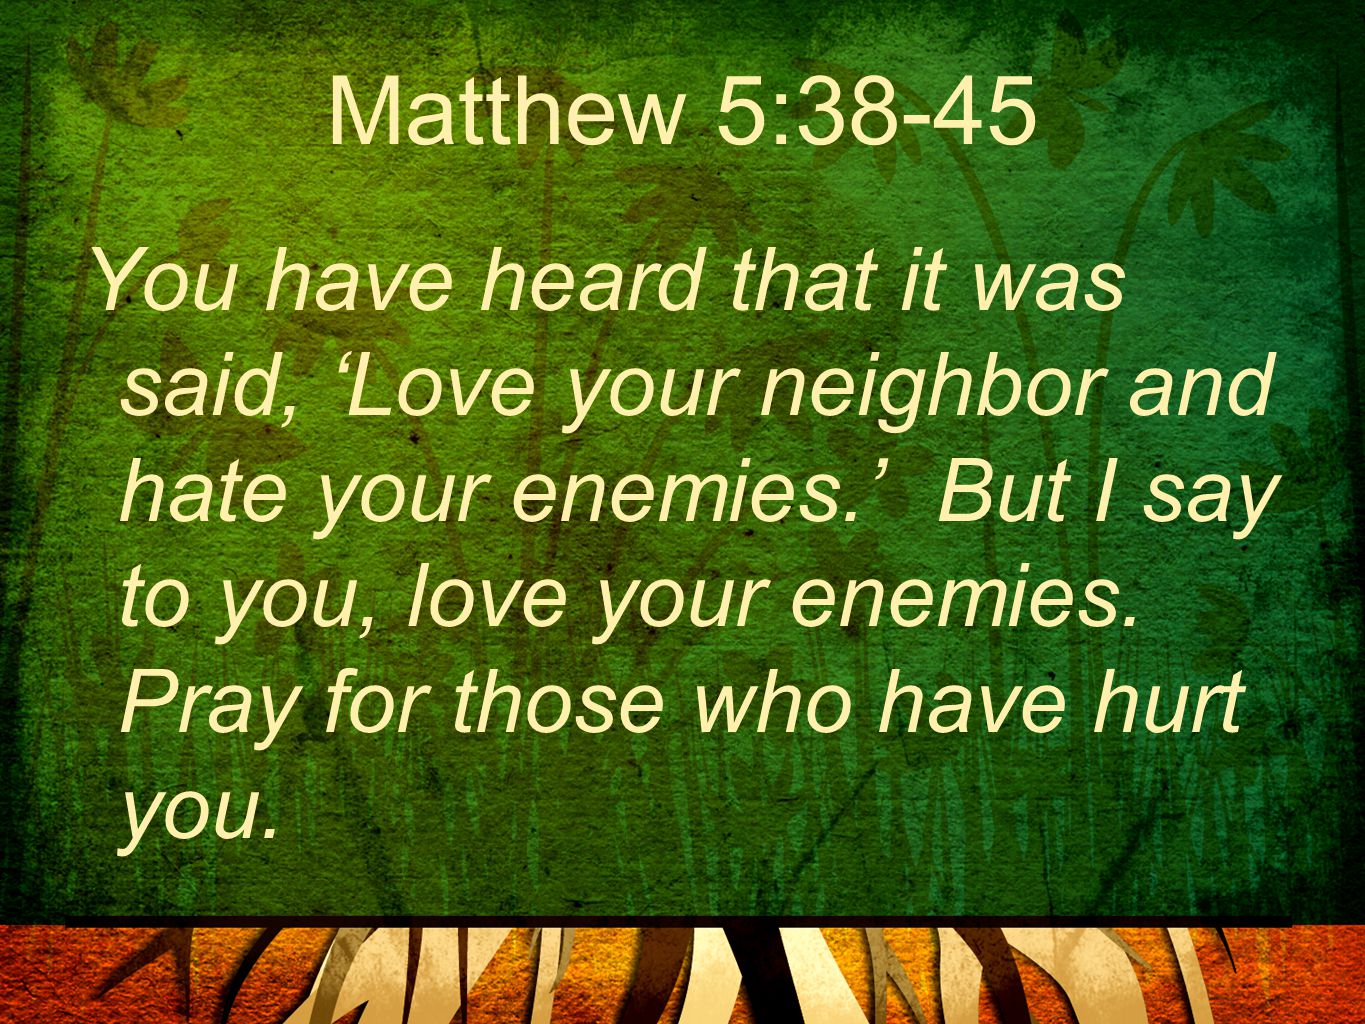 Matthew 5:38-45 You have heard that it was said, ‘Love your neighbor and hate your enemies.’ But I say to you, love your enemies.